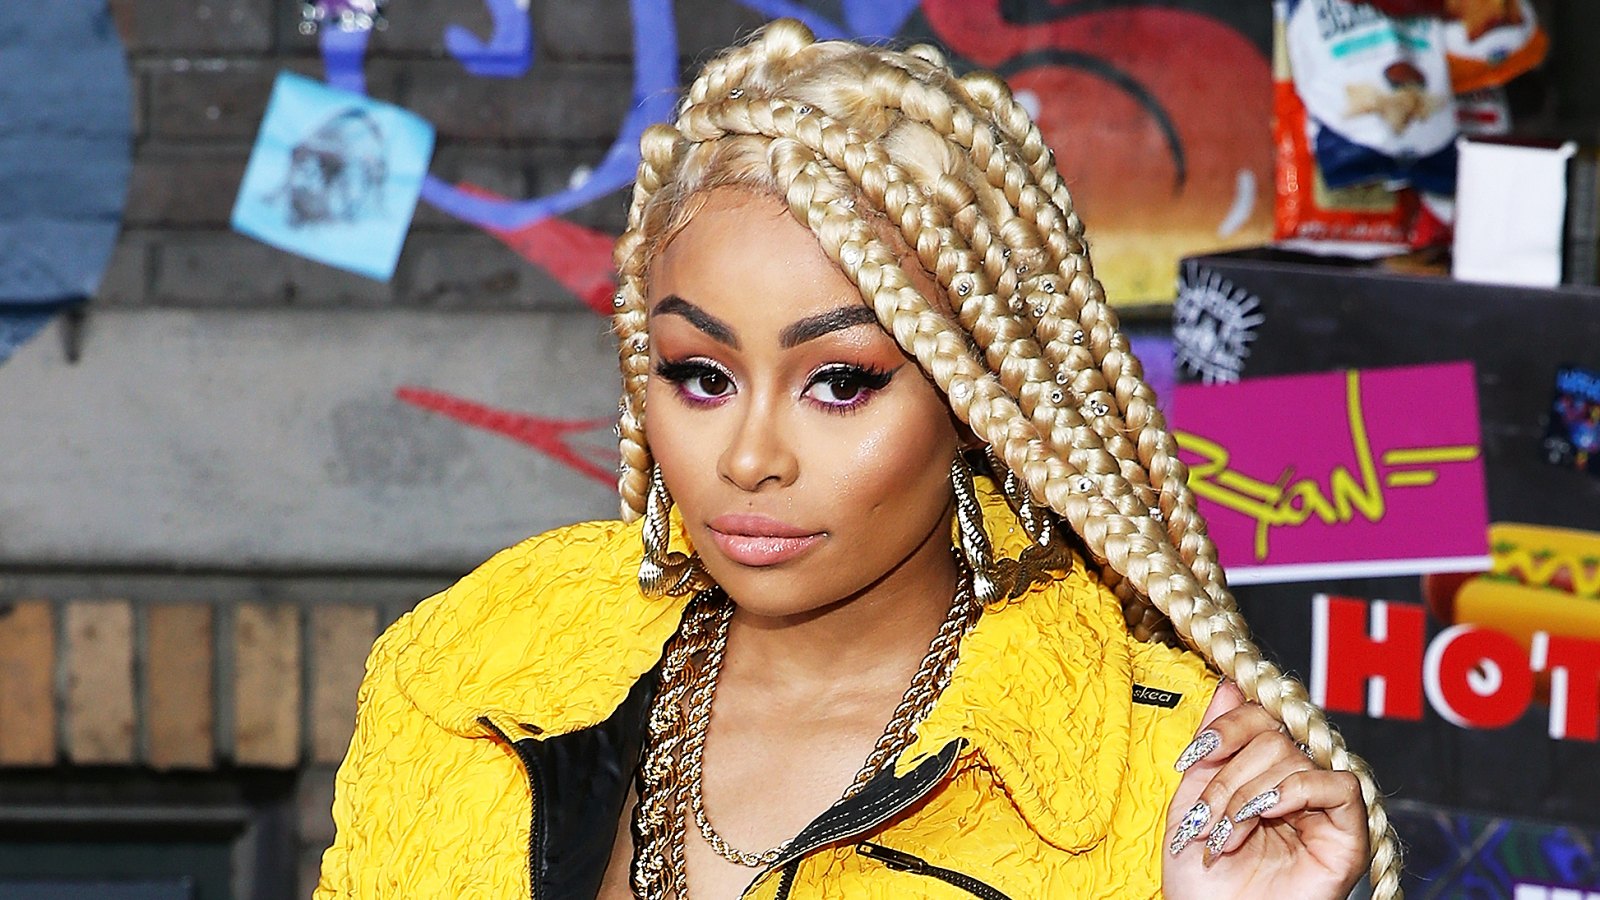 Blac Chyna Appears to Address Alleged Six Flags Altercation